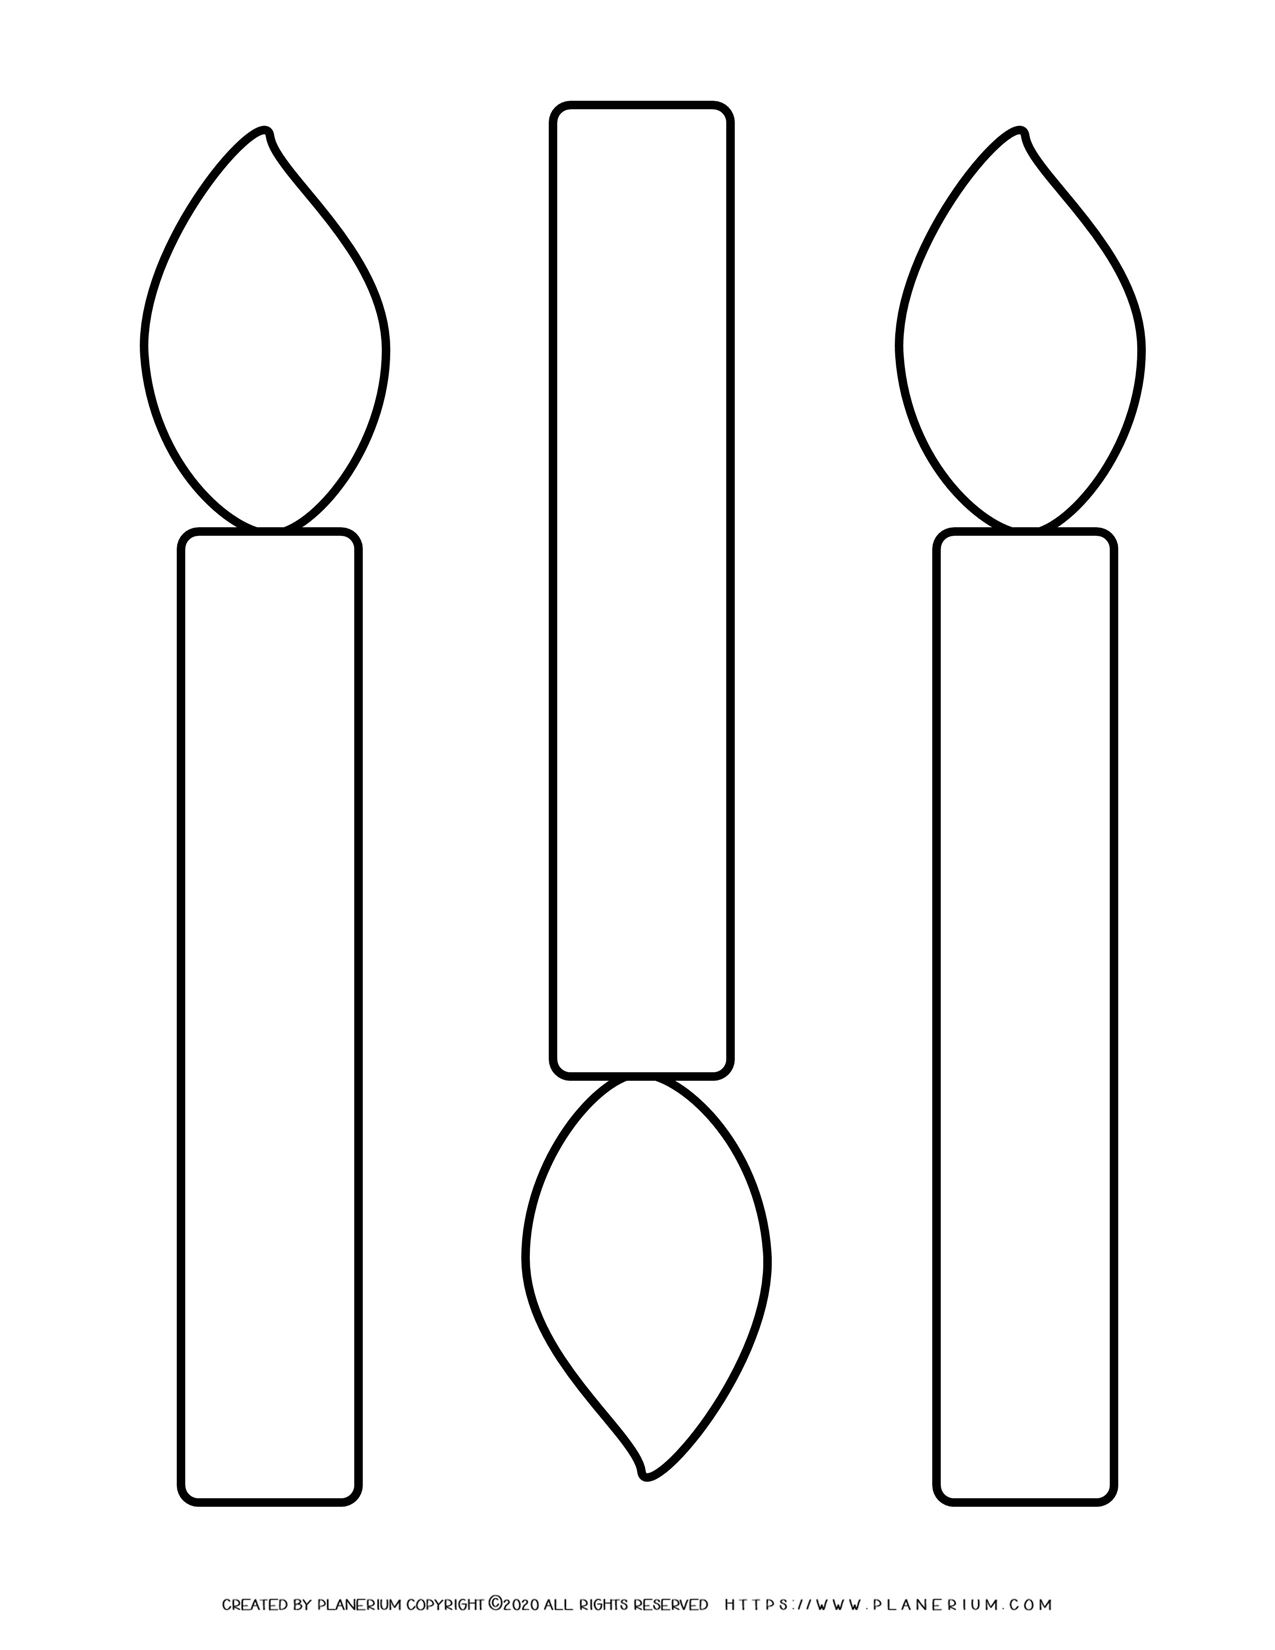 Candles outline | Three Large Candles | Planerium